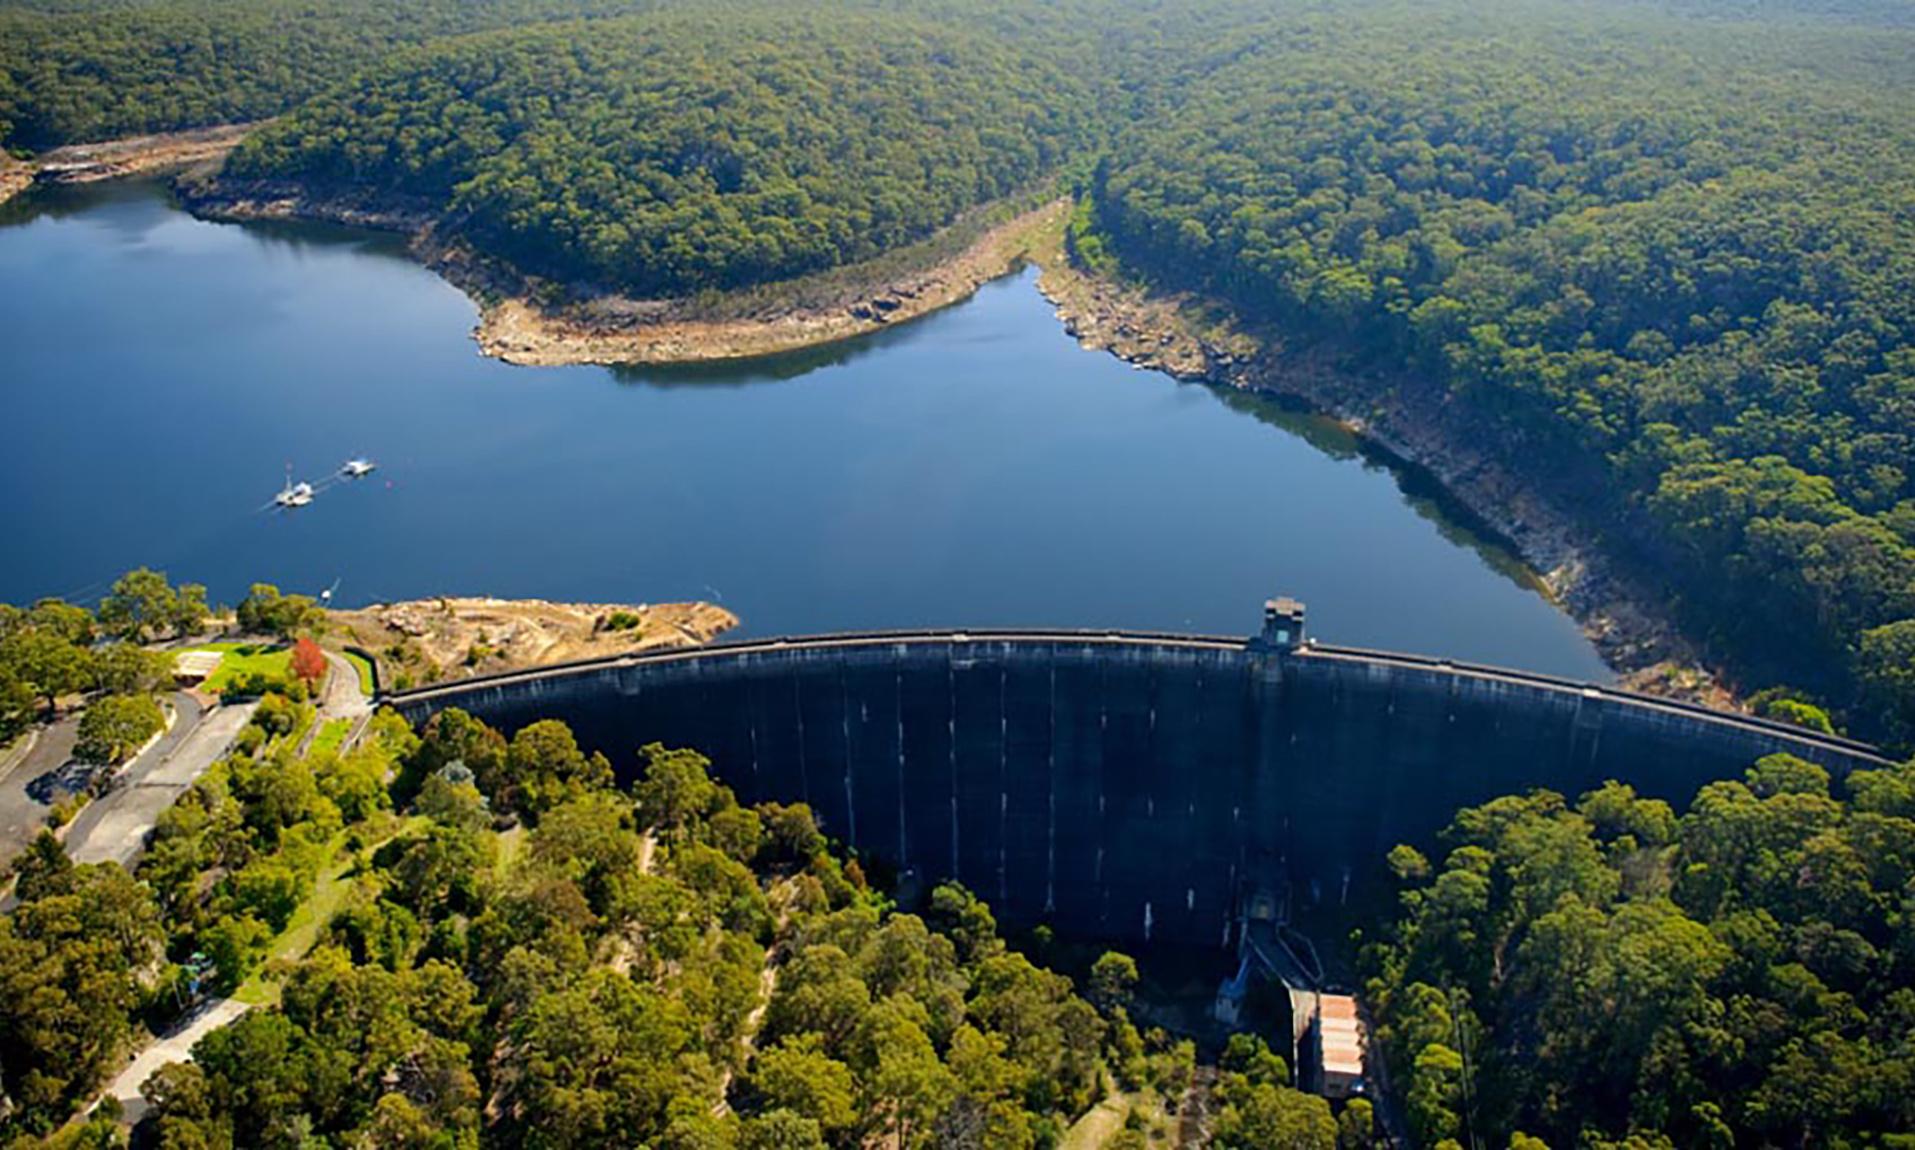 Fears for water quality after NSW allows coalmining extension under Sydney's Worona reservoir